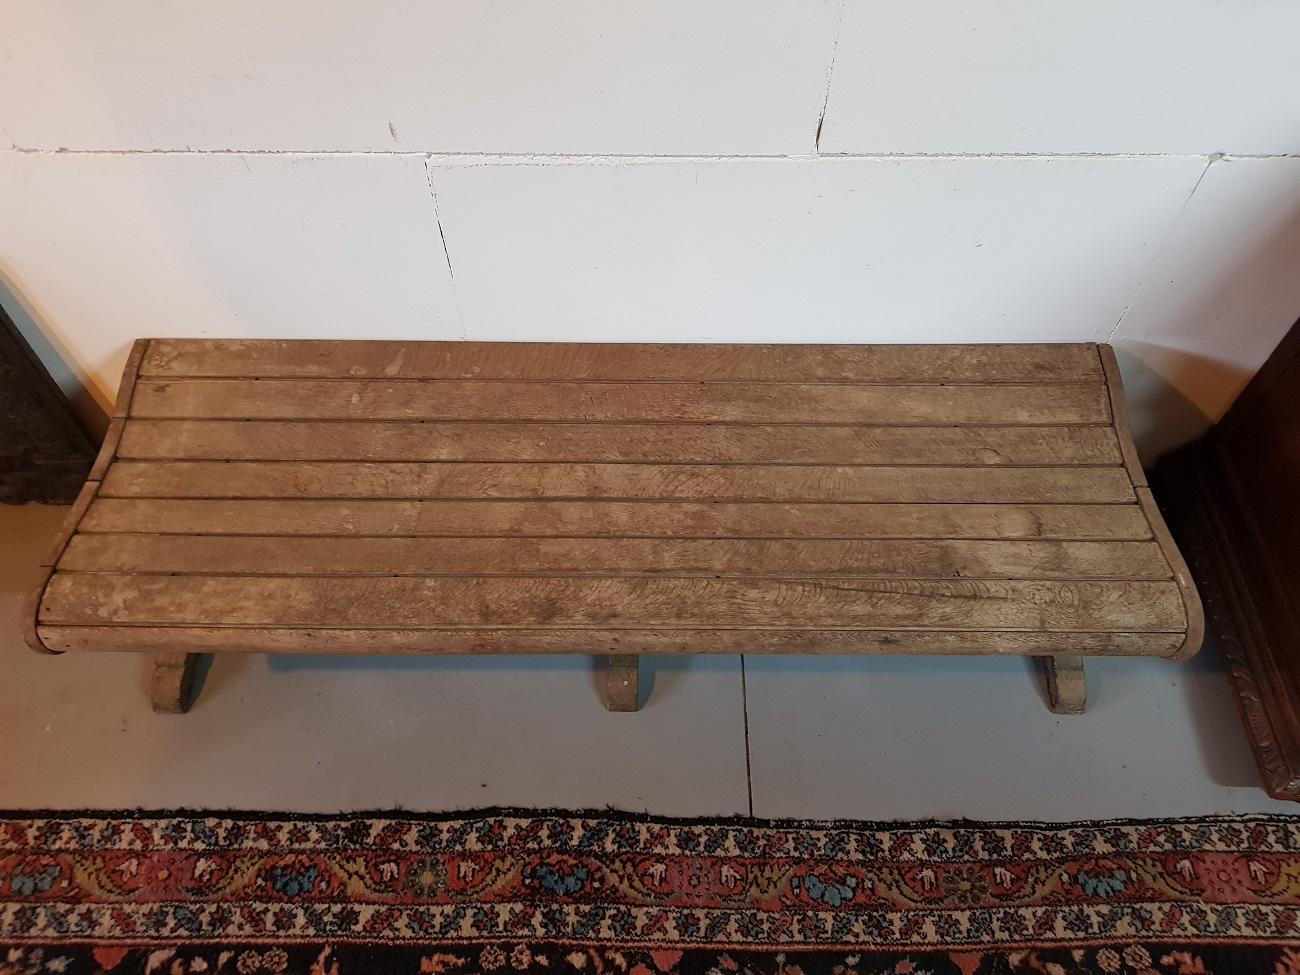 Early 1900s Teak Waiting Bench, from a Station or Zoo (Europäisch) im Angebot